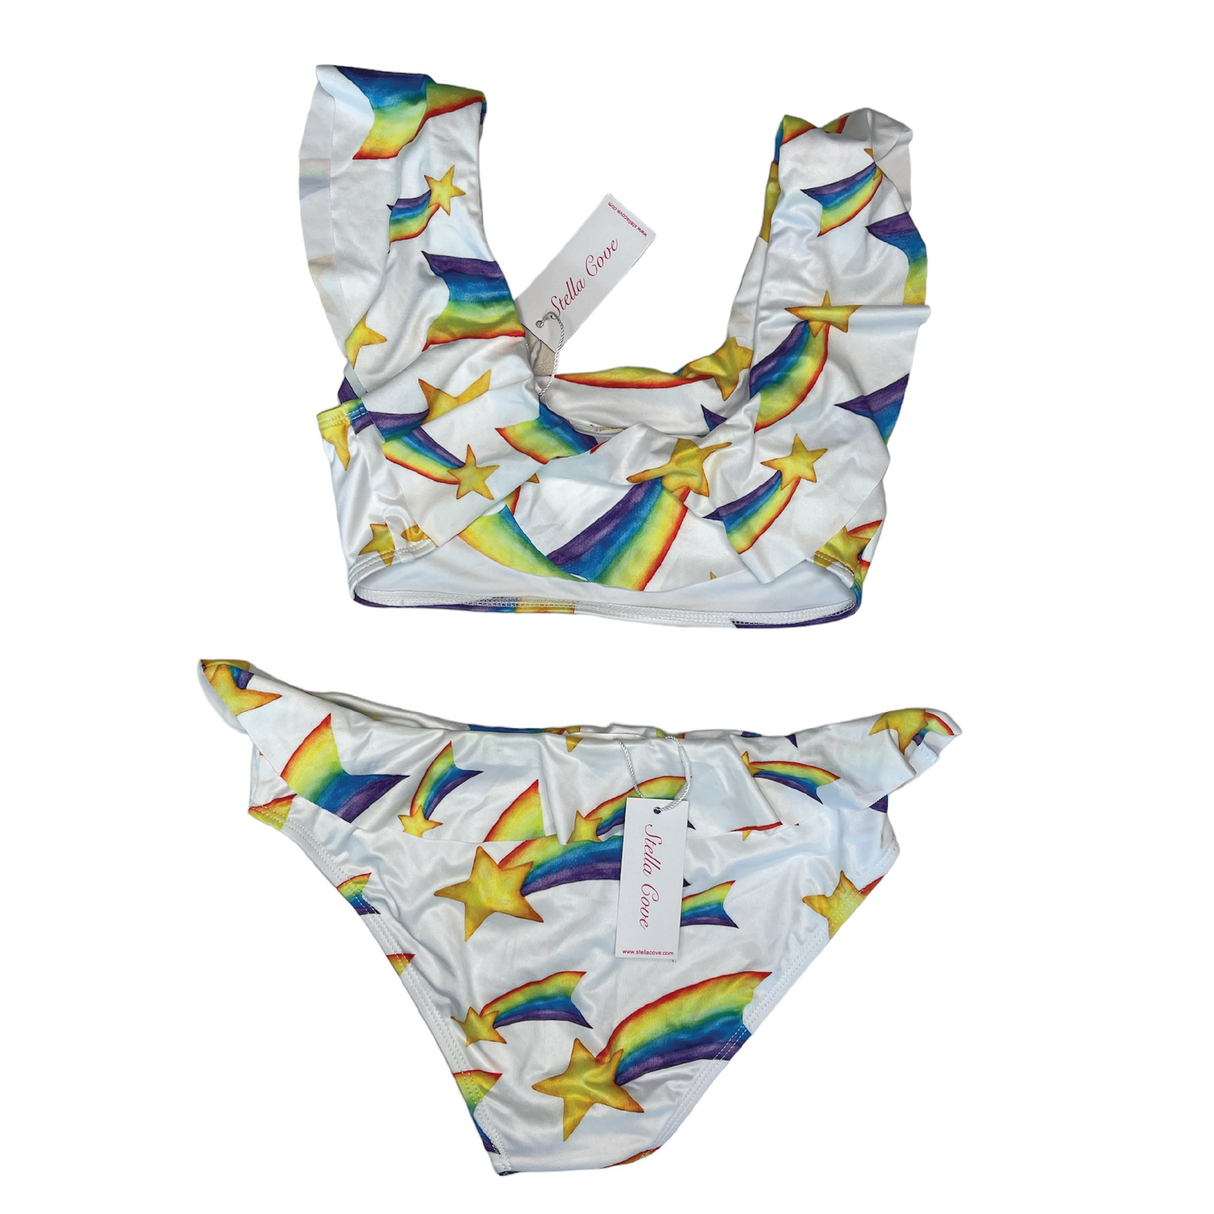 A Second Chance - Stella gove Swimsuit 2 pieces 14Y Brand New - Delivery All Over Lebanon